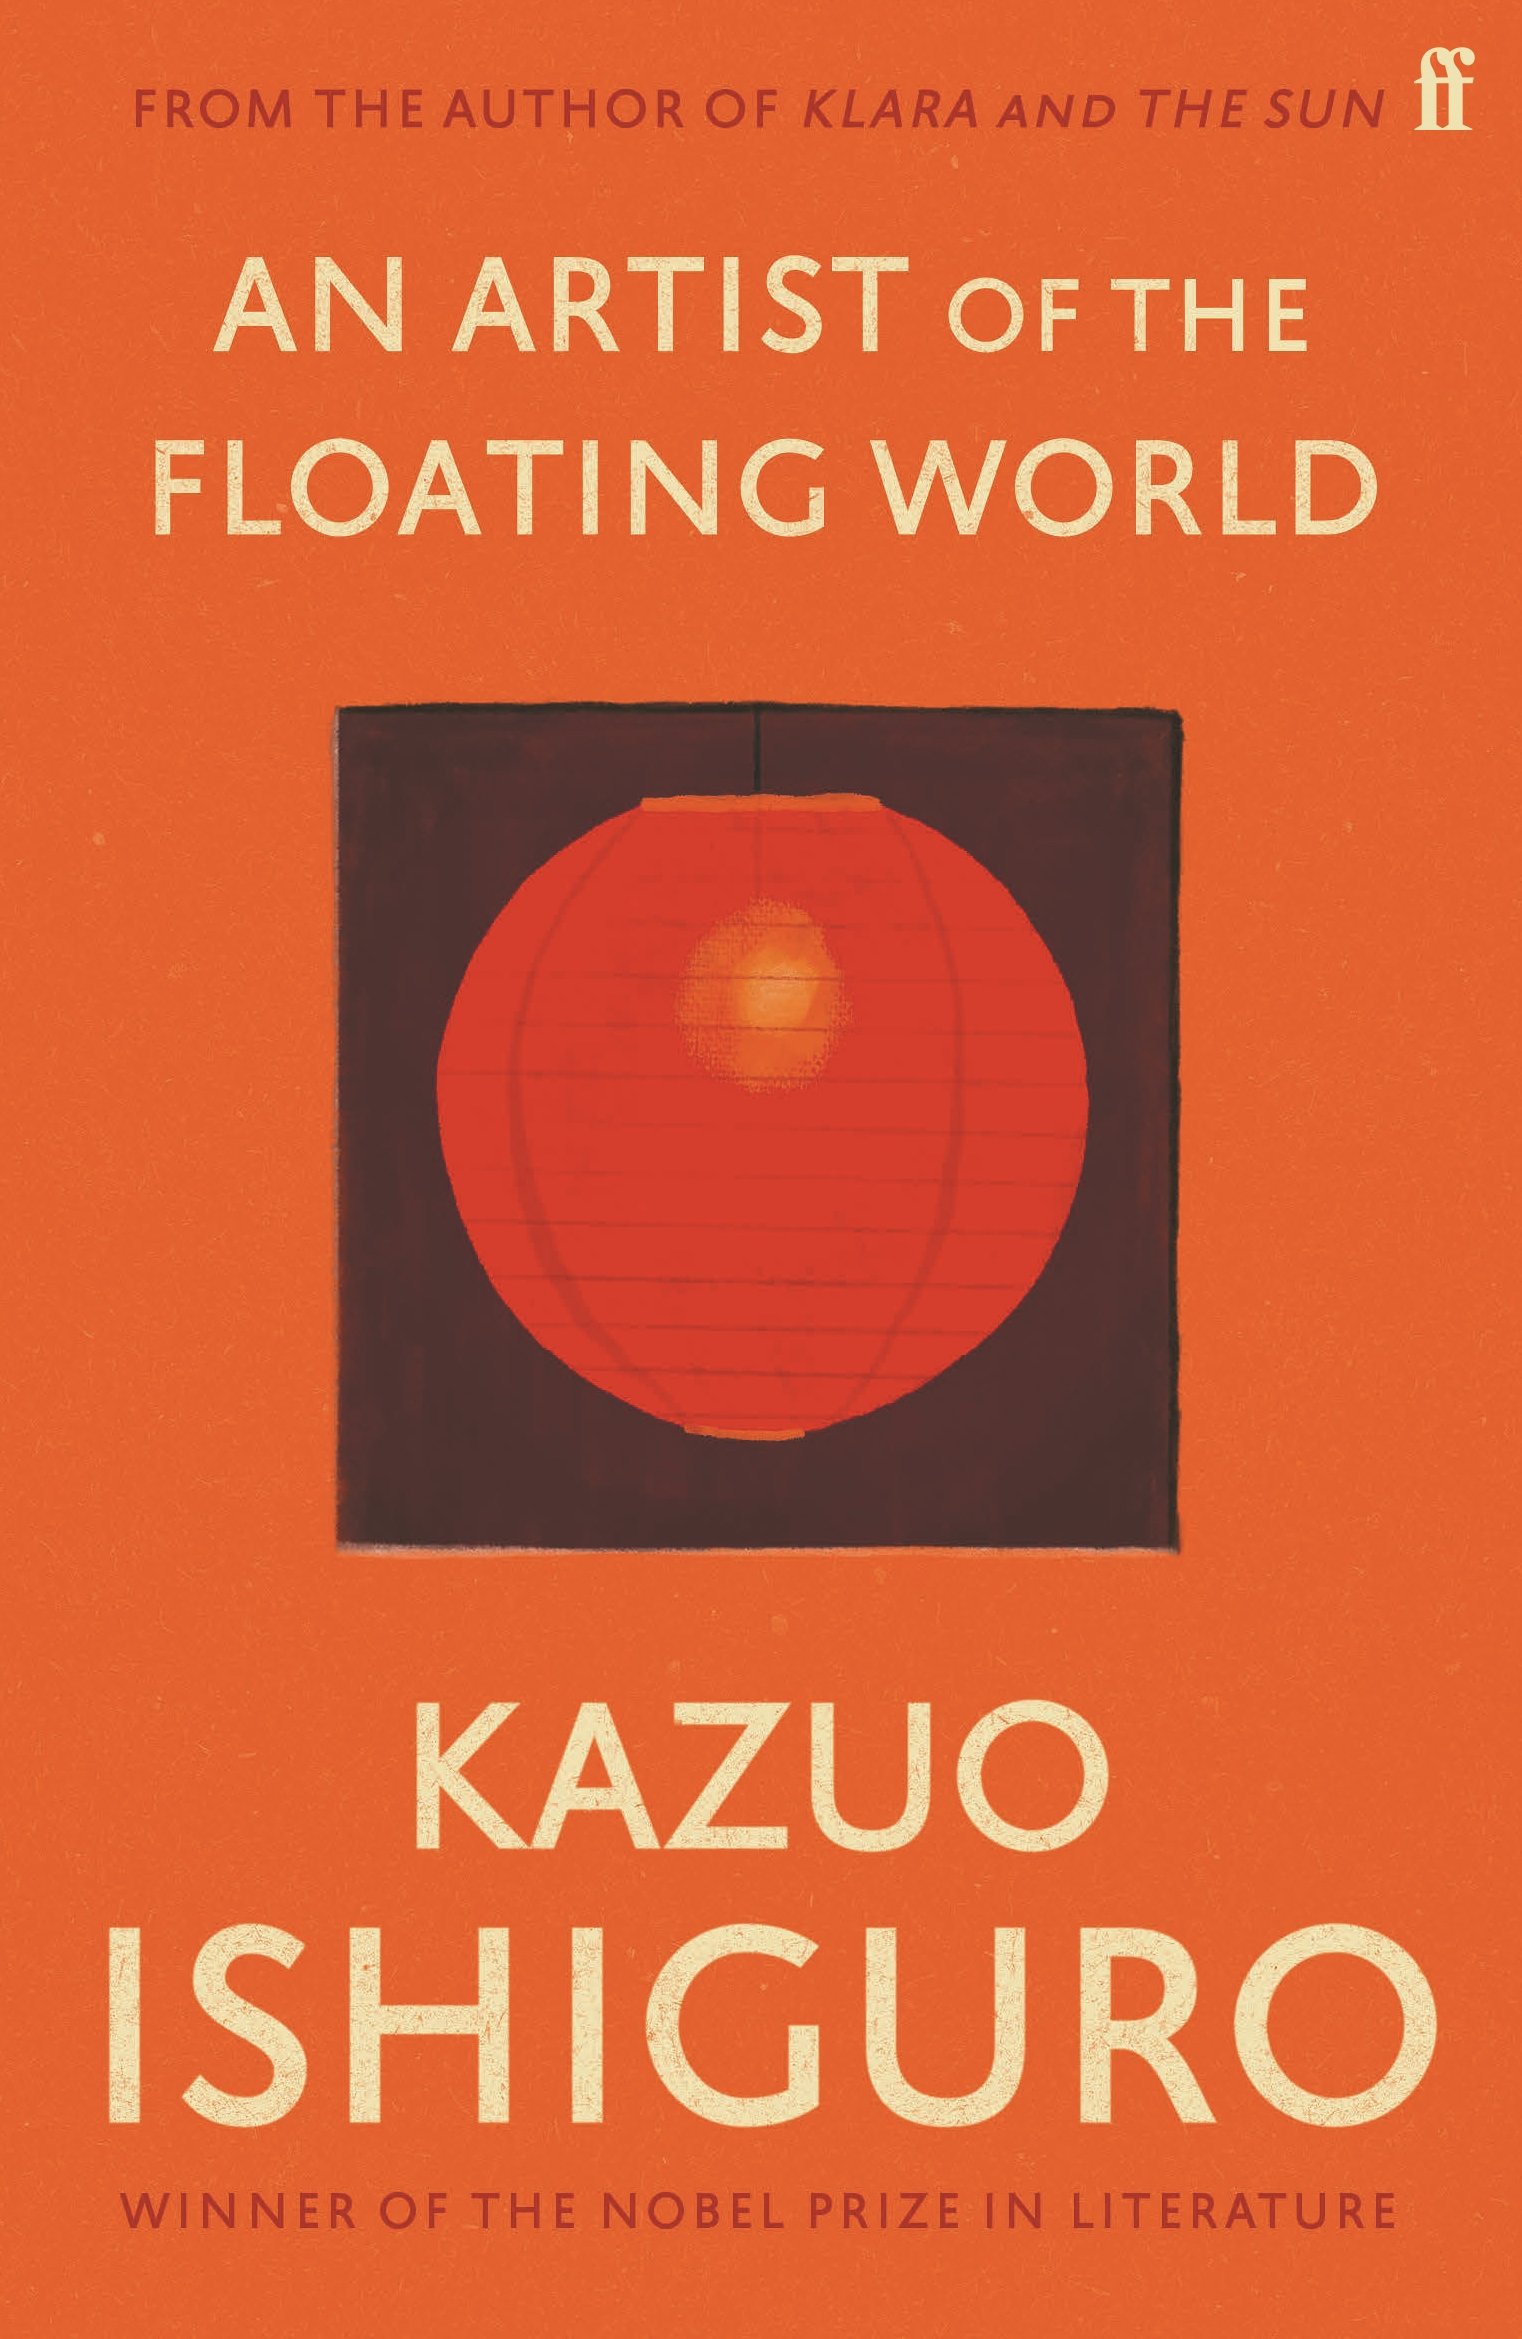 Ishiguro　Kazuo　by　World　Floating　Artist　the　of　An　Faber　Books　Shop